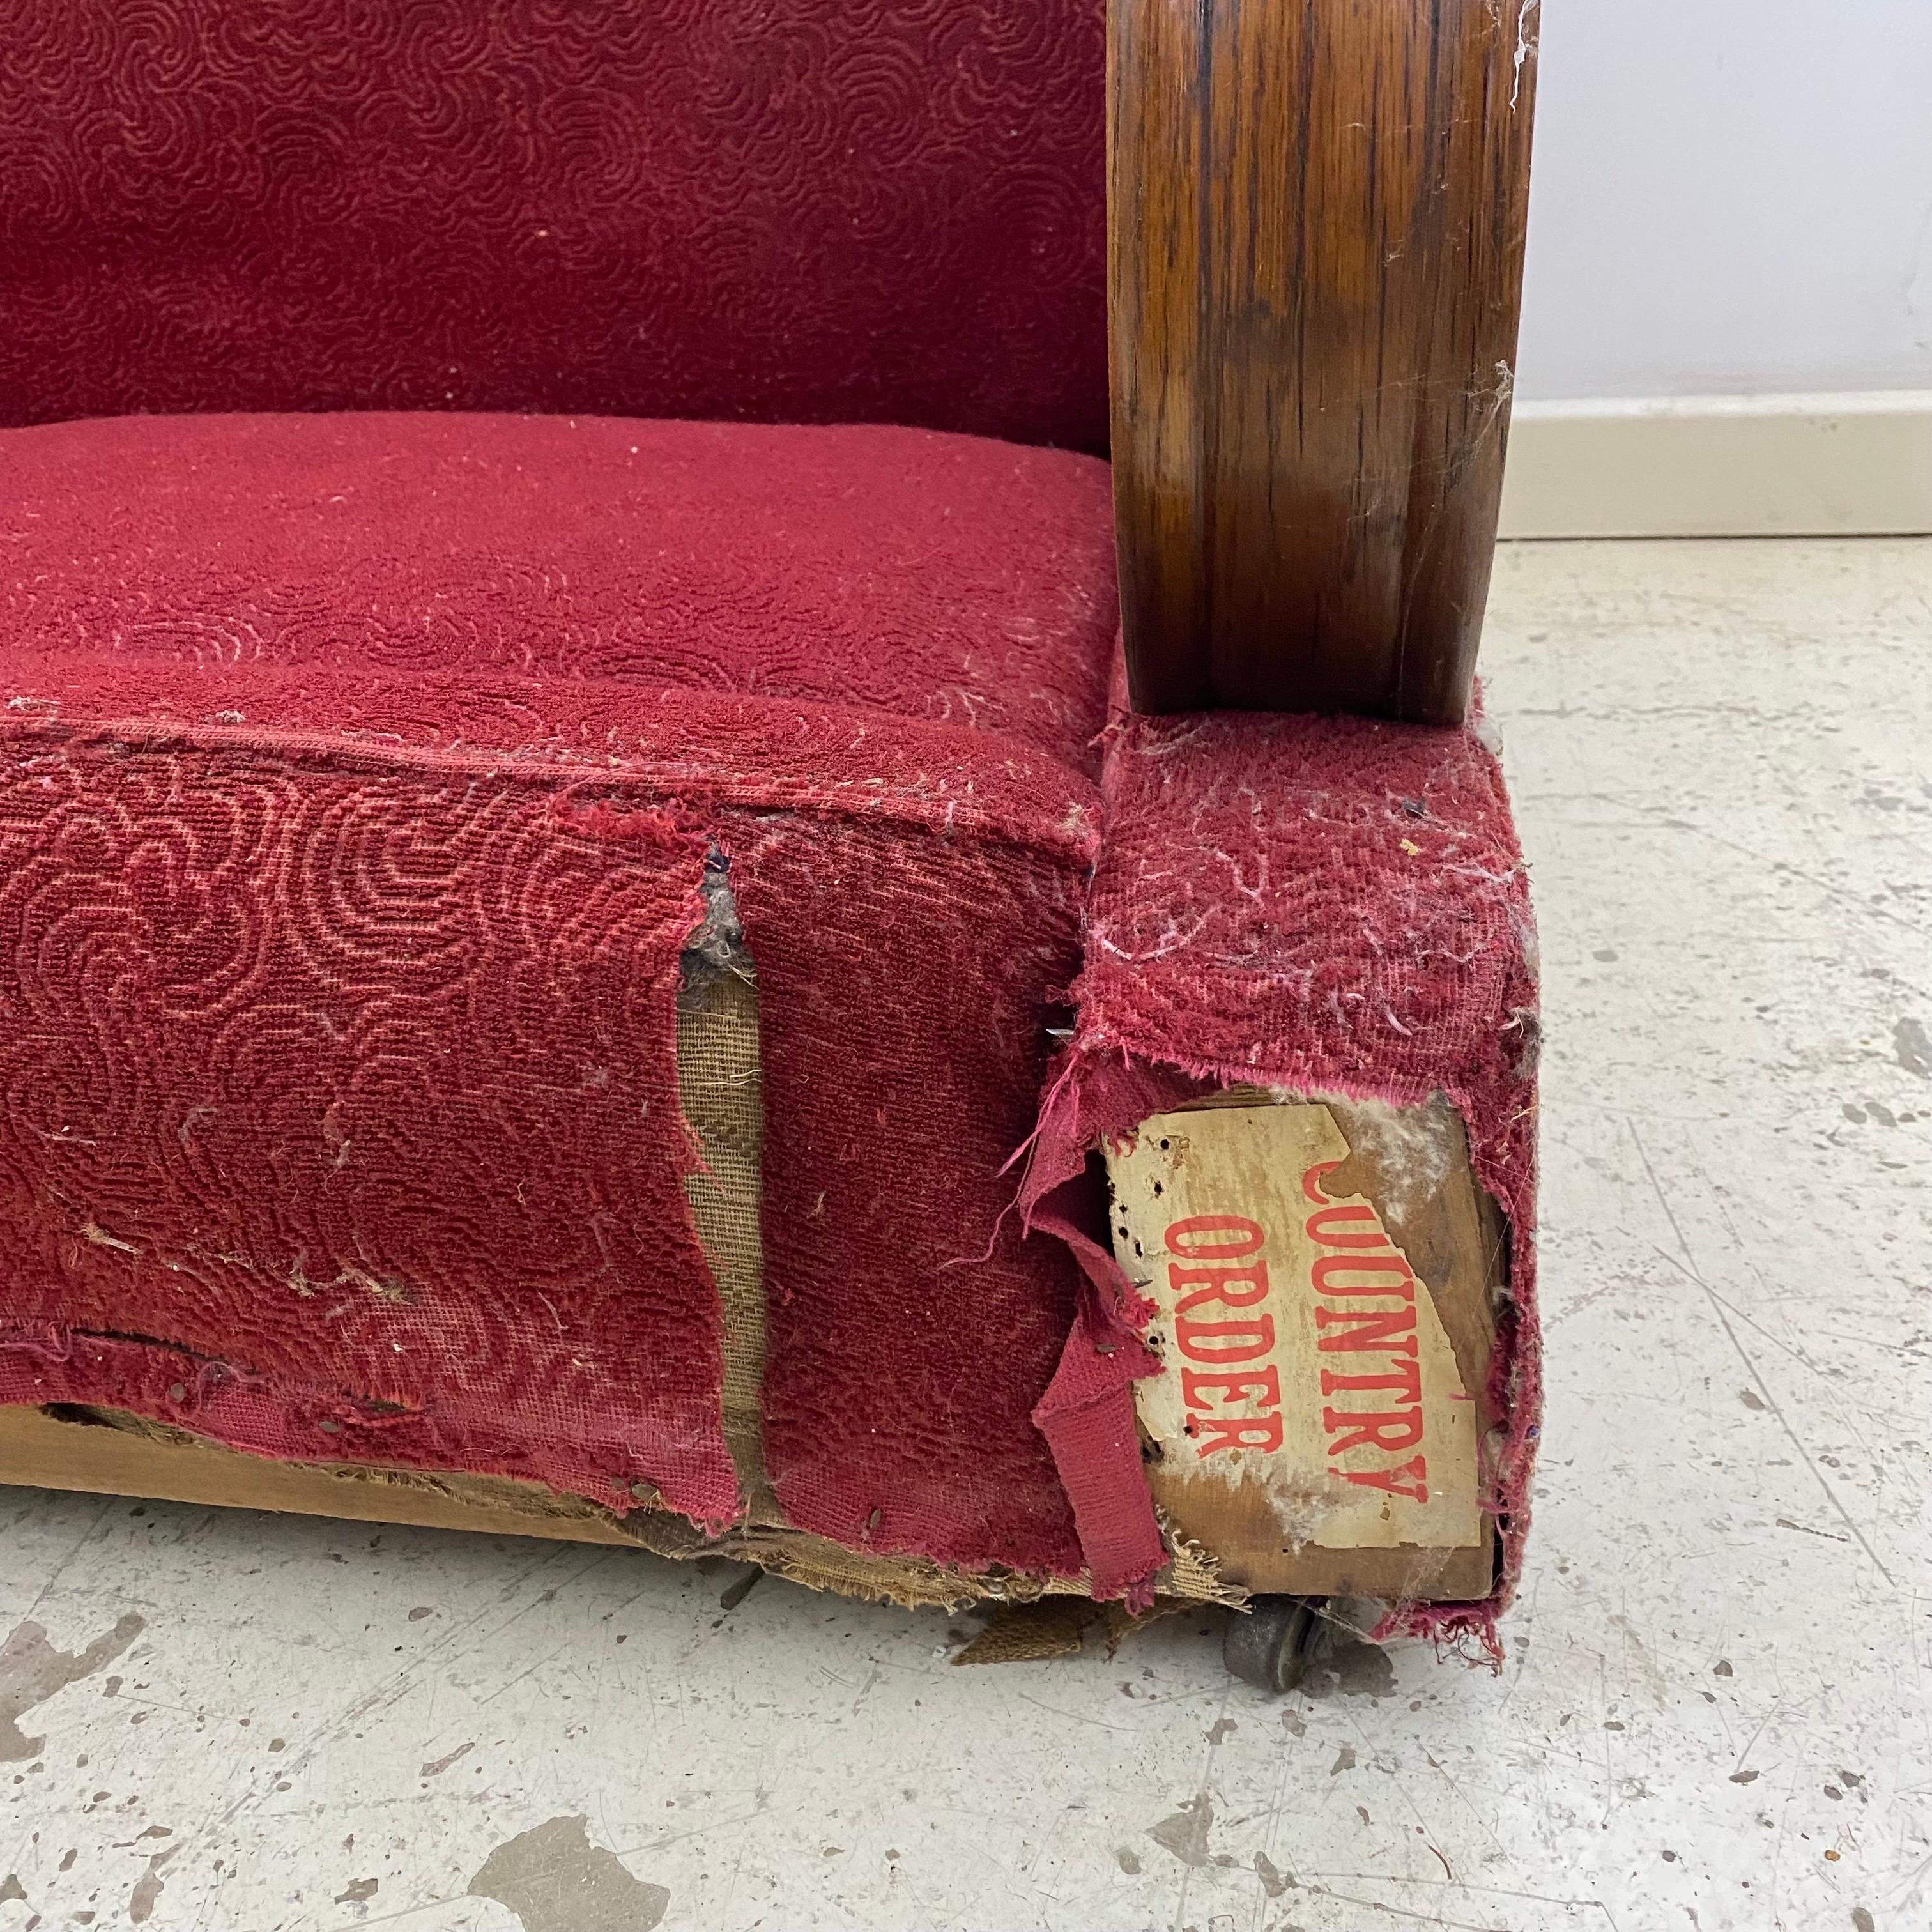 Art Deco 1940s Red Two Seater Distressed Sofa Restoration Project As Seen Poirot en vente 3